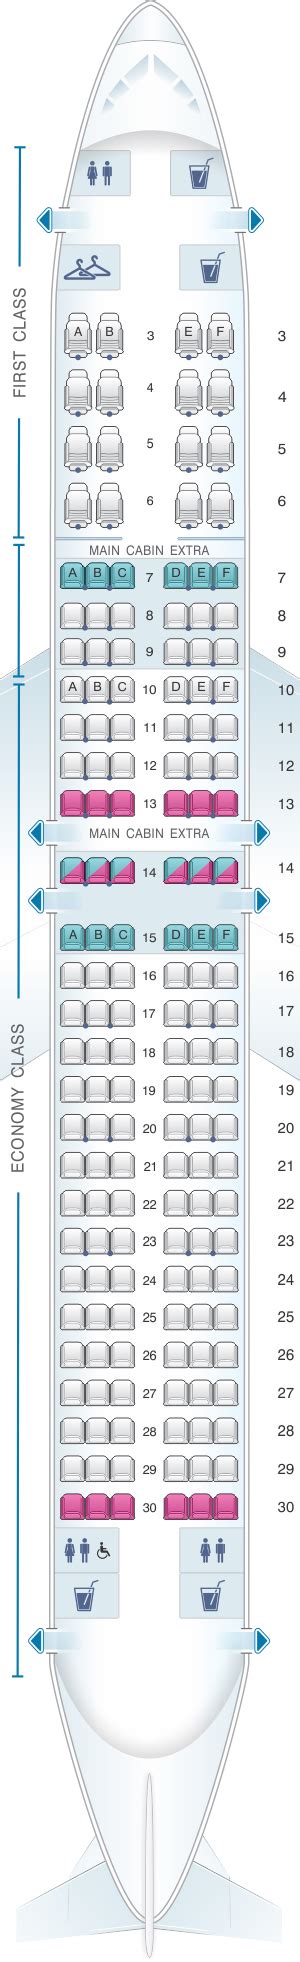 The Boeing 737-800 plane is configured with domestic First Class and Coach and is often used on routes to lower demand domestic destinations as well as parts of the Caribbean and Central America. Remember FEBO (Front Even Back Odd), as this is American Airlines' way of taking meal orders in premium class based on flight number.